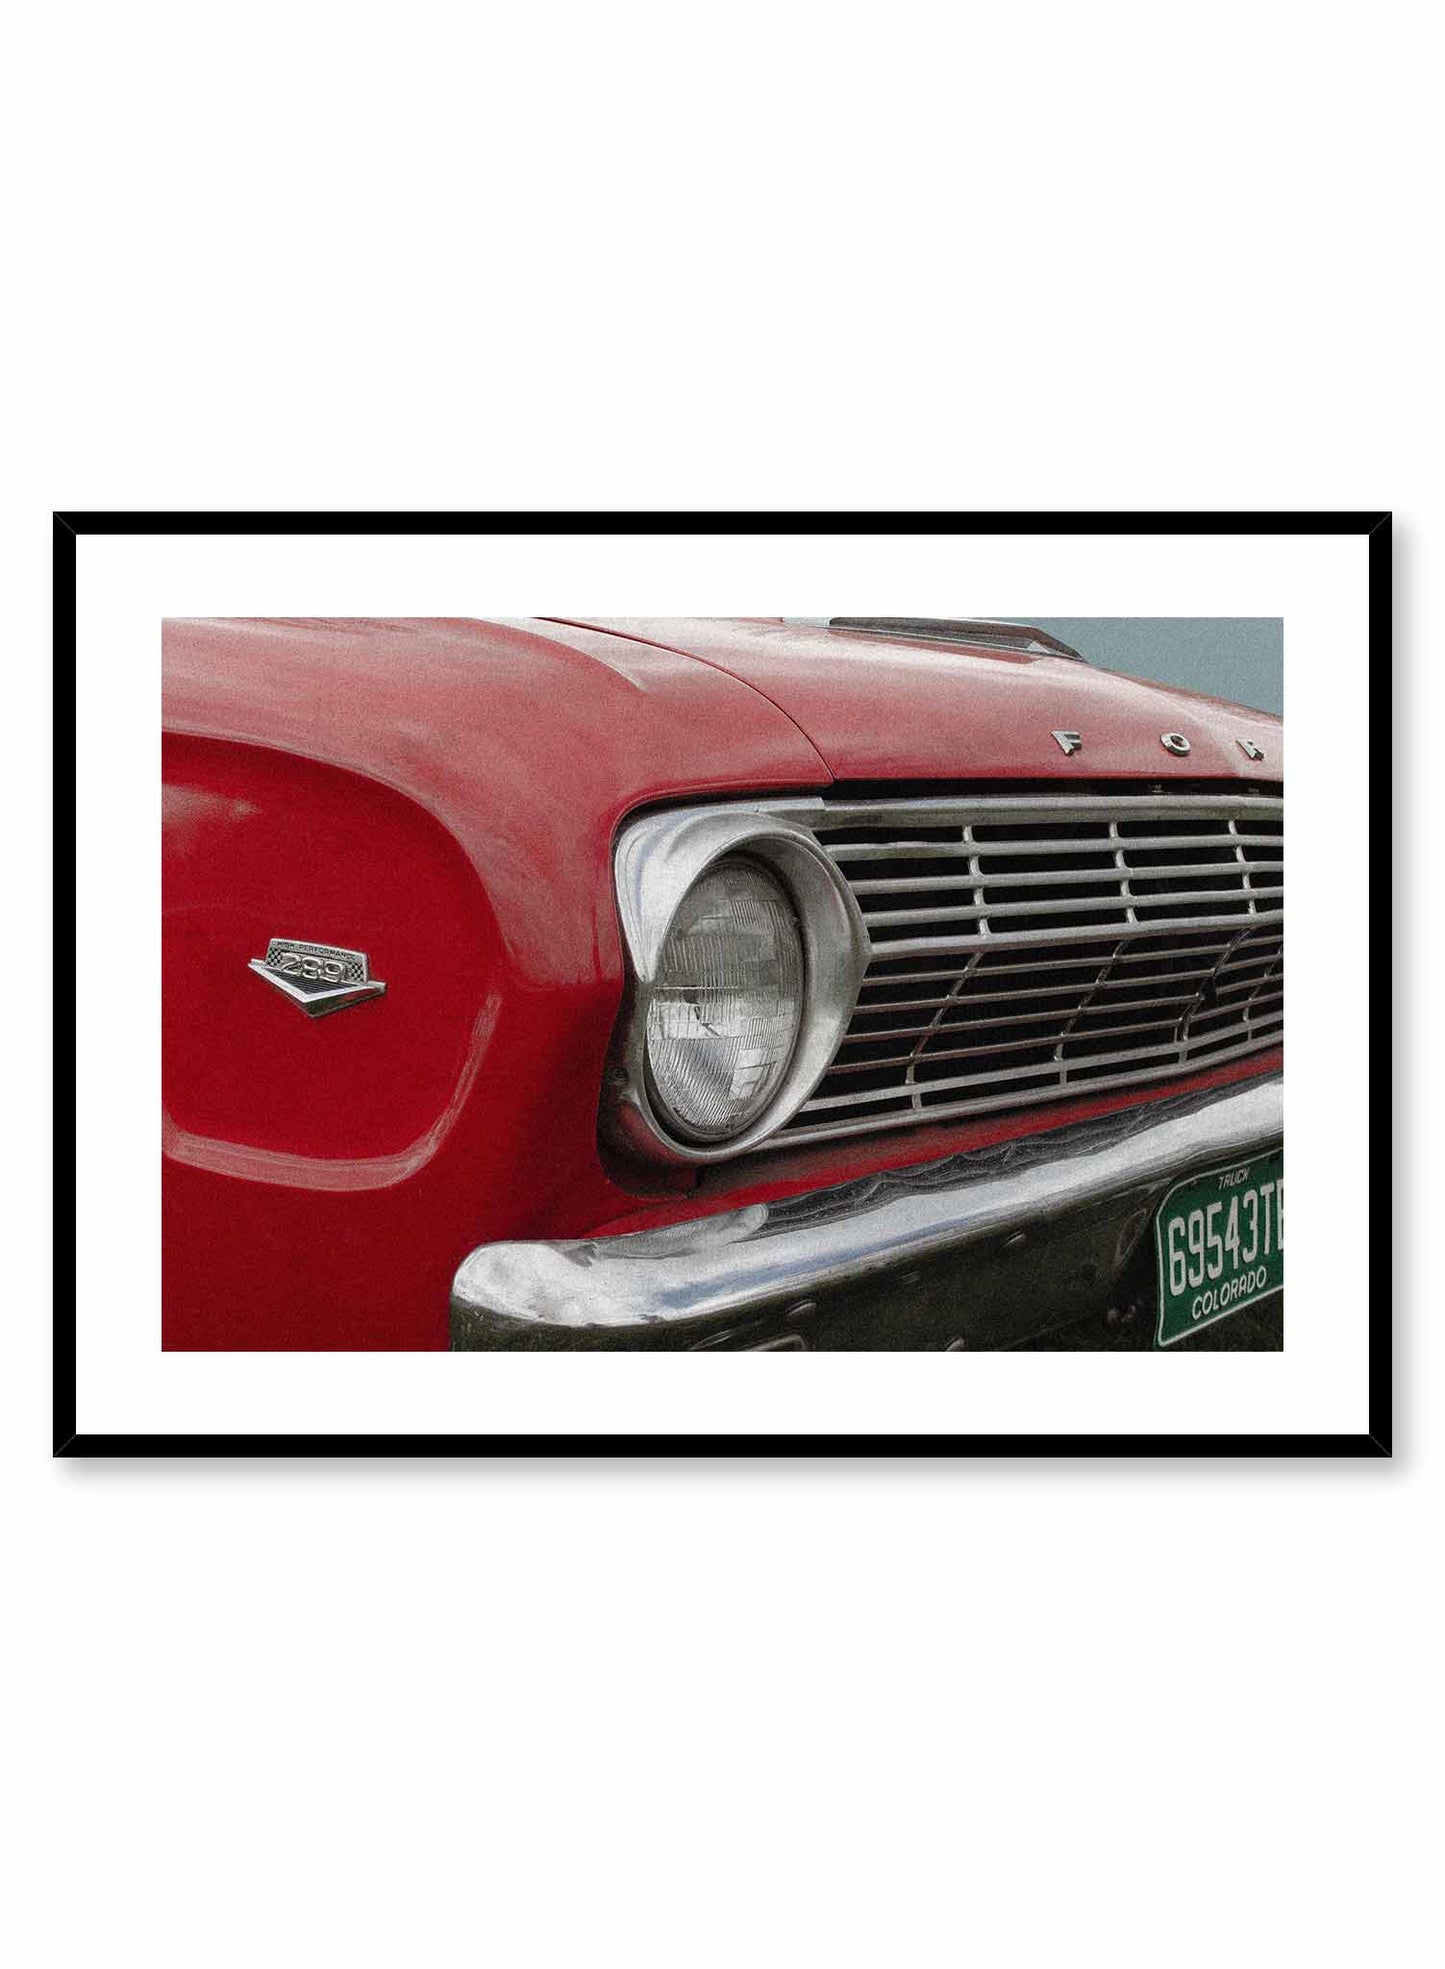 ‘50s Bumper is a vintage photography poster of a red Ford car's bumper by Opposite Wall.